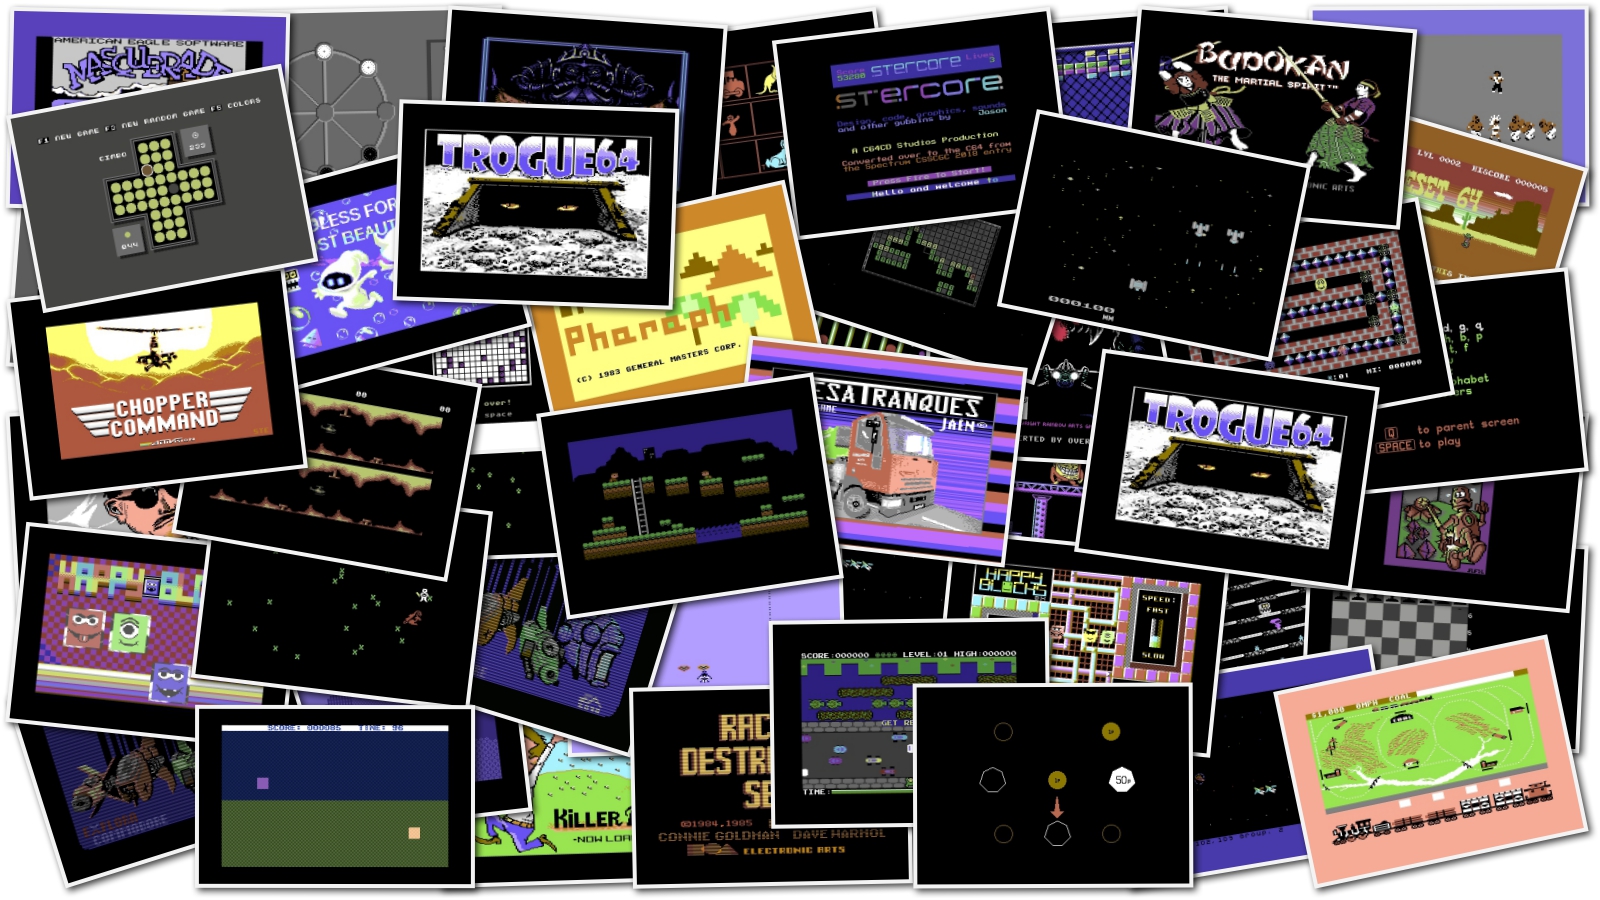 Commodore 64 Emulator - Computer Chess Game Collection